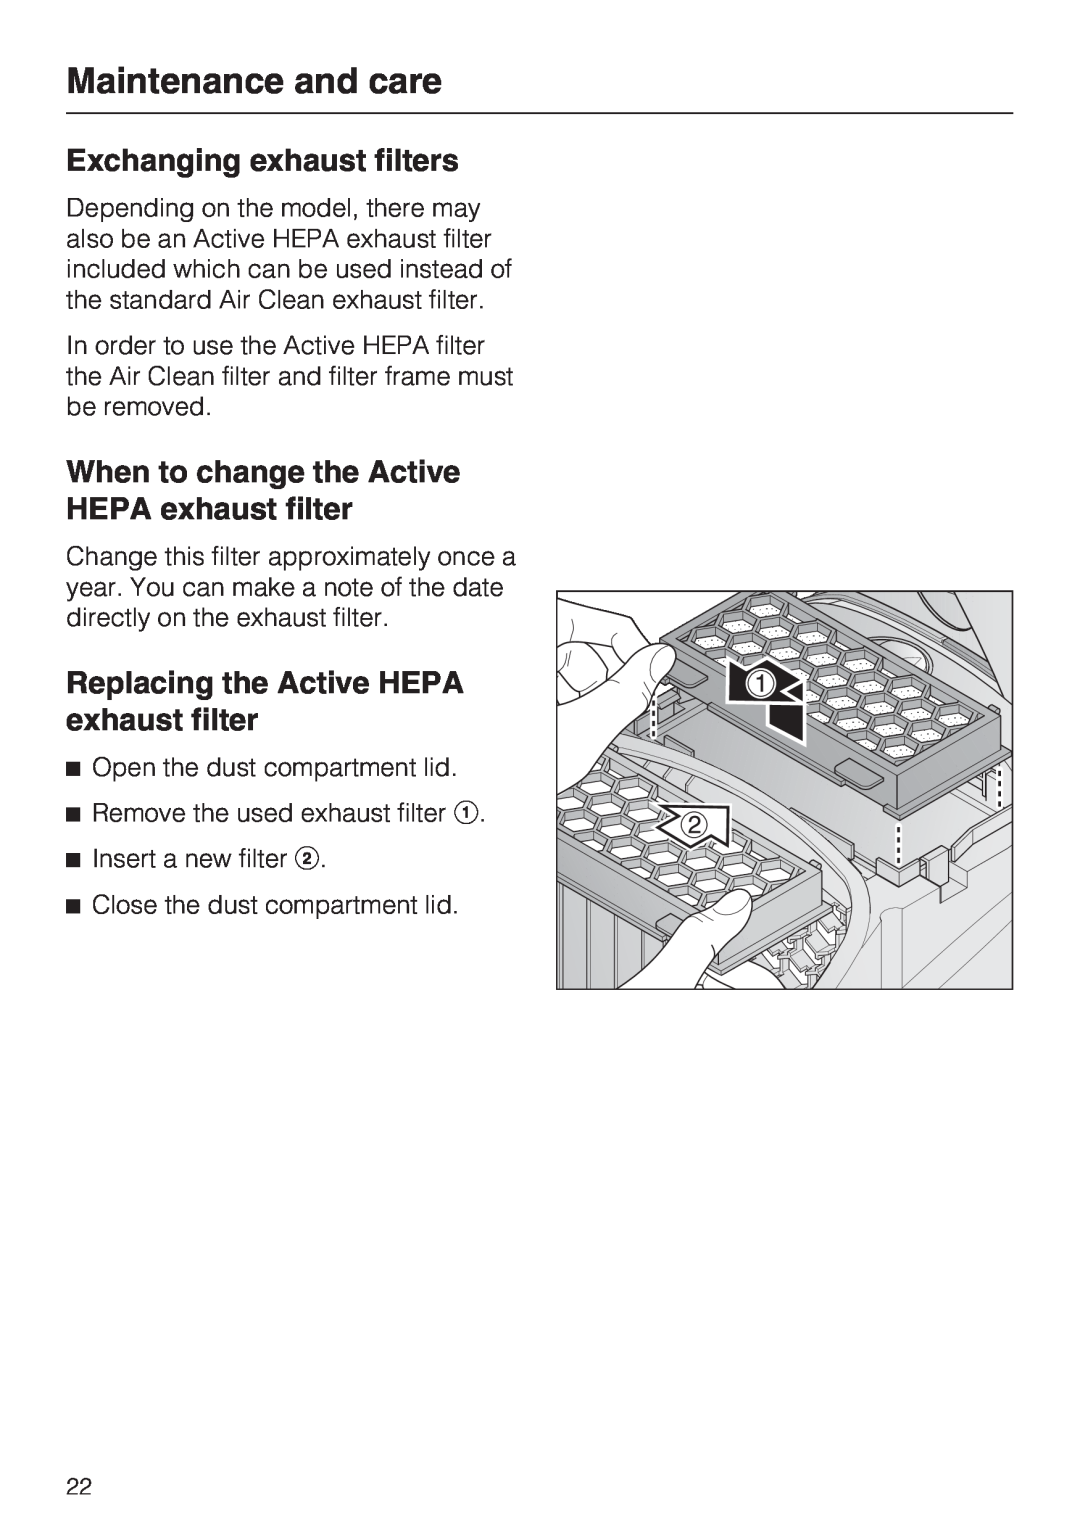 Miele S 2001 manual Exchanging exhaust filters, When to change the Active HEPA exhaust filter, Maintenance and care 